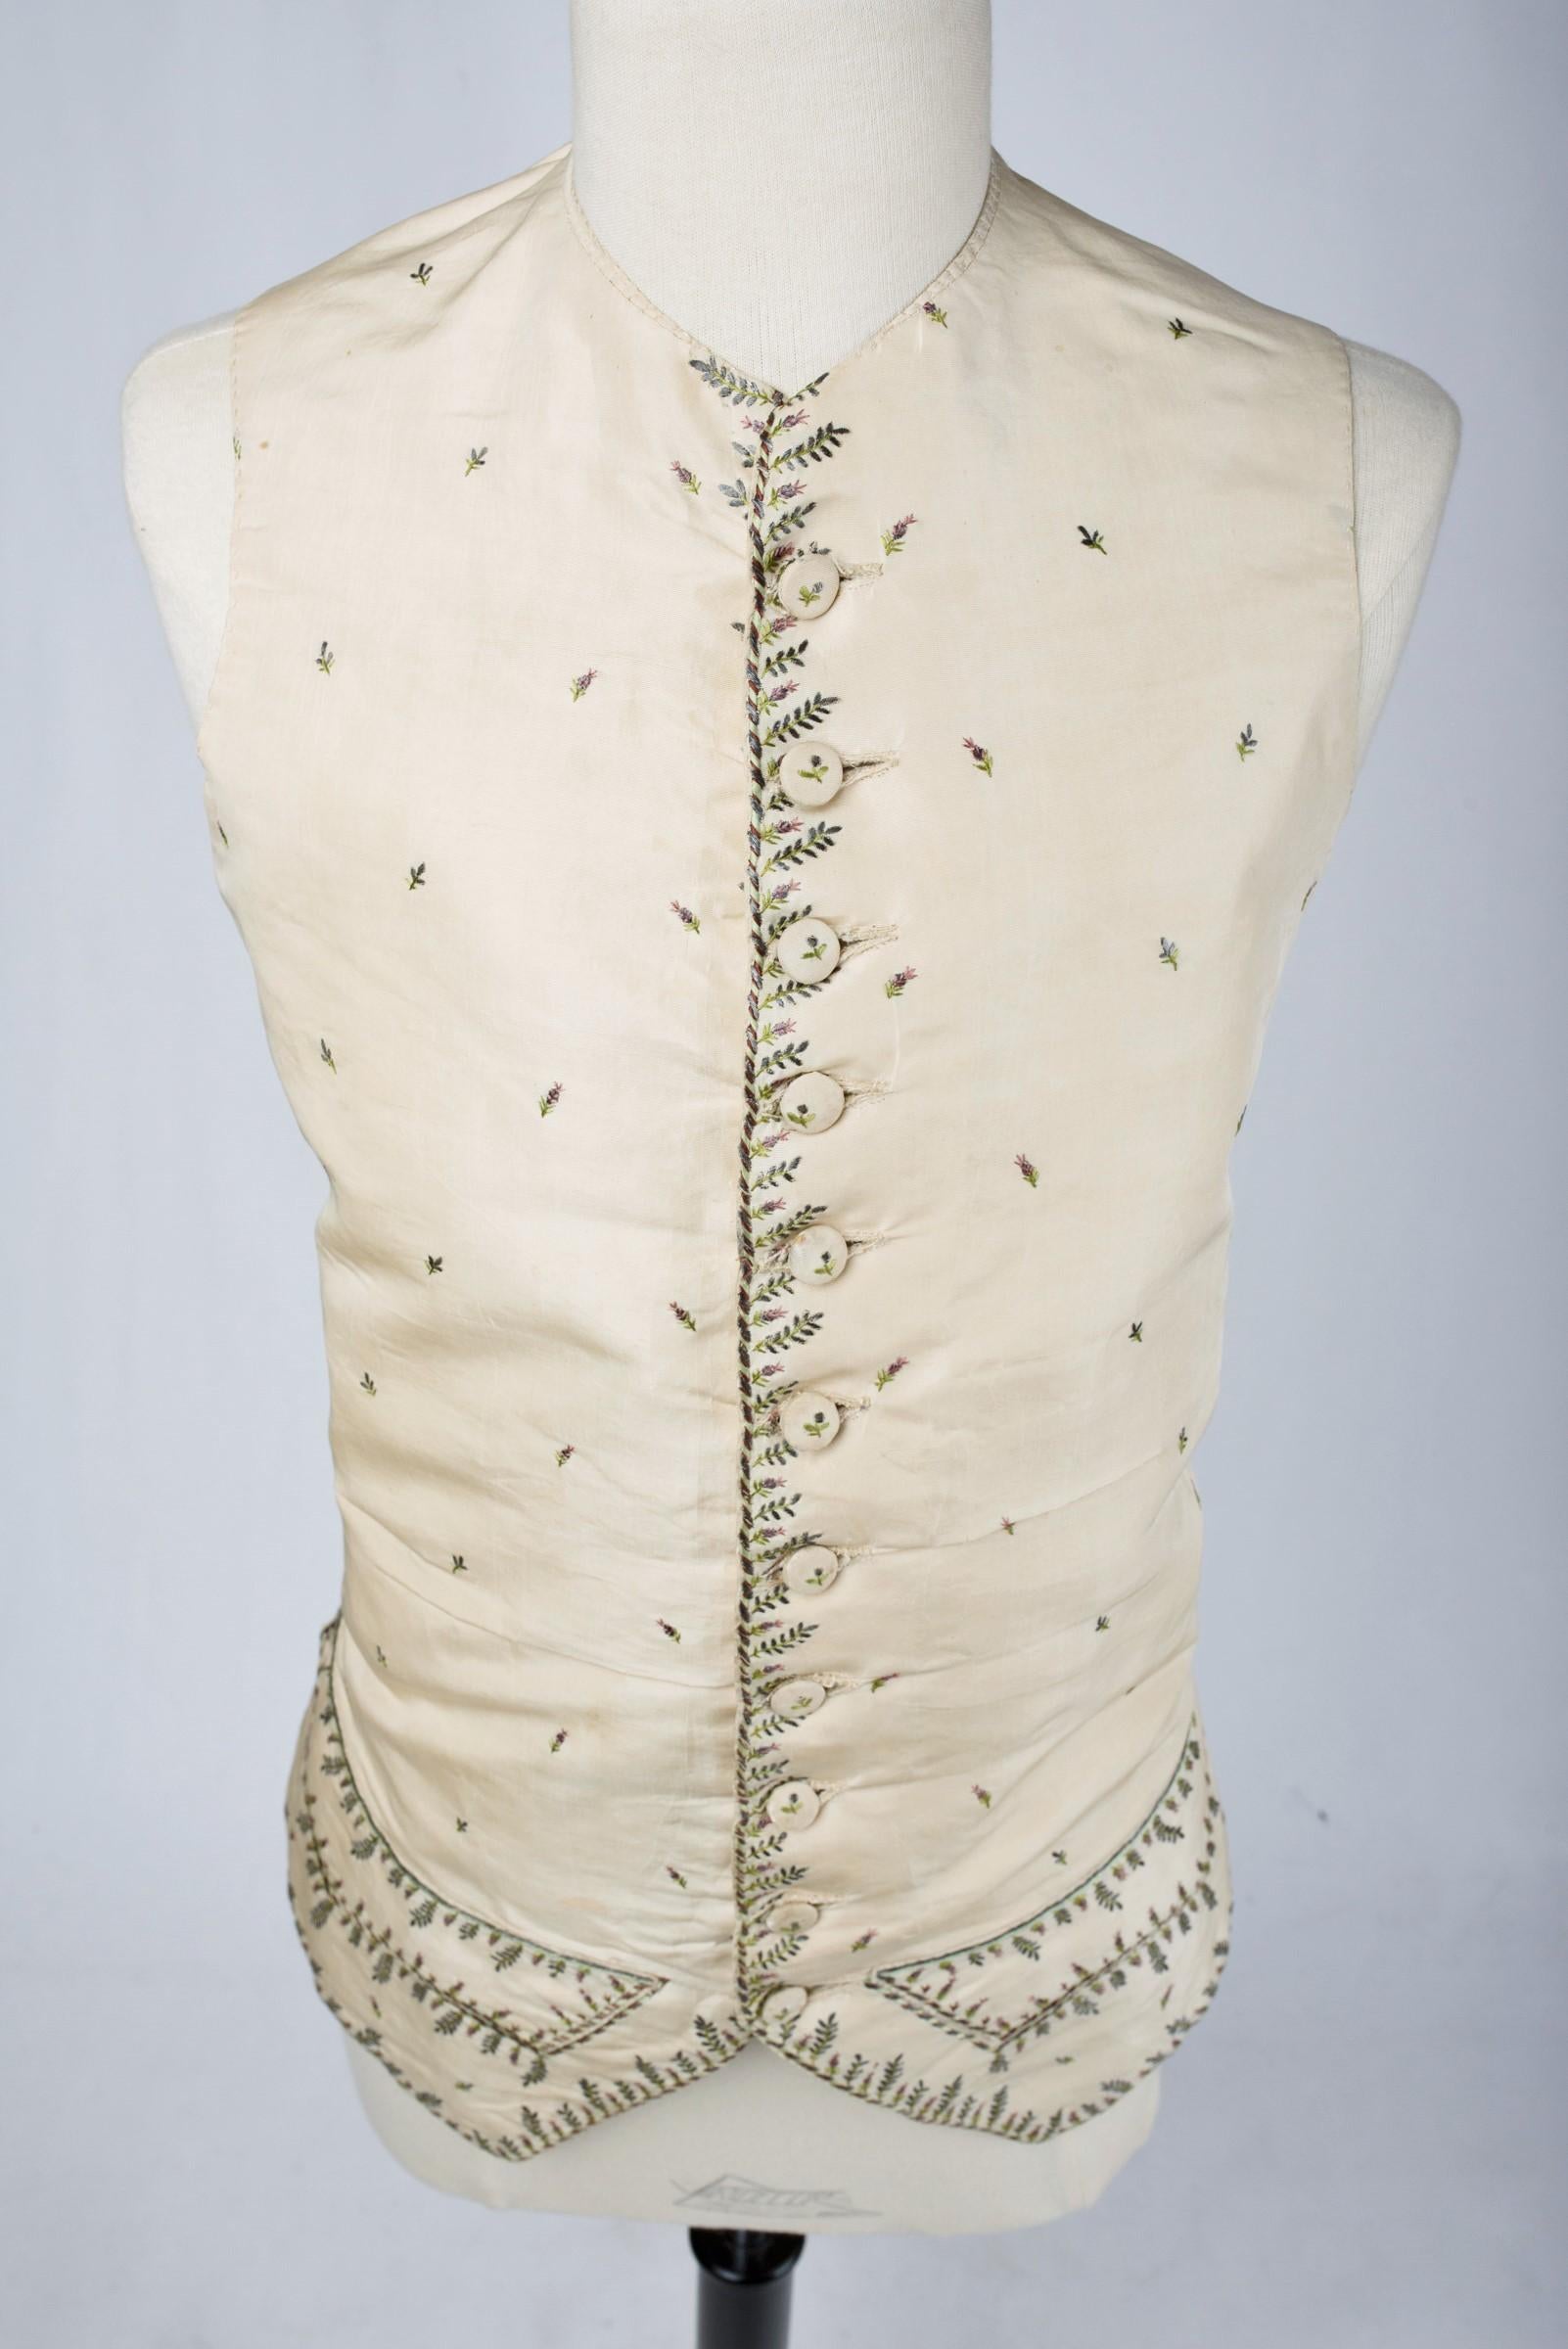 Circa 1785
France

Elegant vest with basques in cream gros de Tours embroidered with silver and polychrome silk threads dating from the Louis XVI period. Embroidery with design of tricolored ribbons on the perimeter dotted with leafy stems, herbs